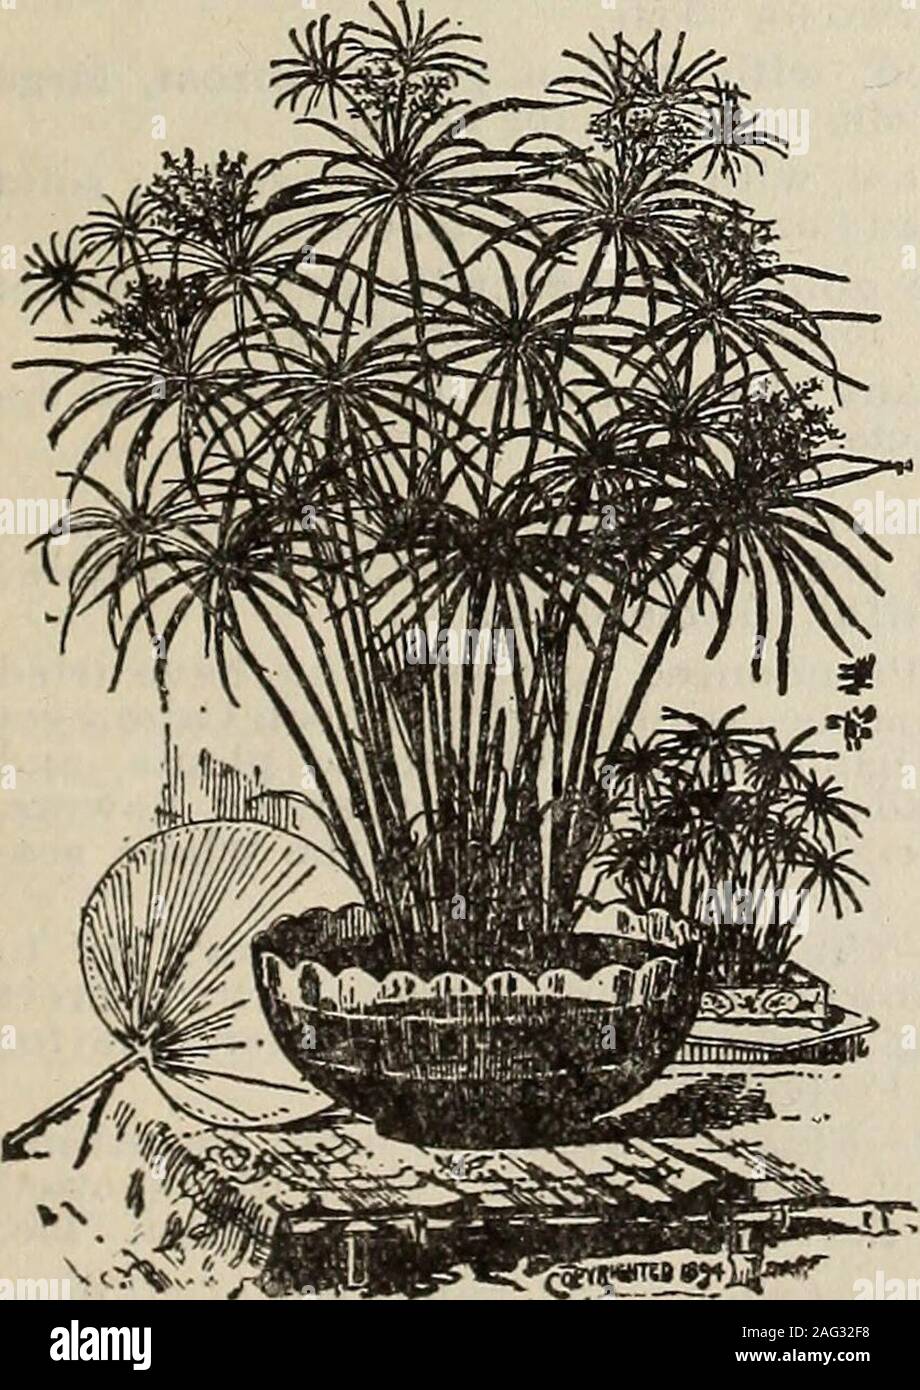 . New floral guide : 1899 plain abridged edition. Ostrich Feather Palrn (Areca Lutescens.) Cocos Weddelliana. One of the grandest and most beautiful palms for house culture now known.The foliage is rich glossy green with bright yellow stems, full of grace andbeauty ; hardy and easily grown ; and grows more beautiful as it grows older and larger. The palms require no special treat-ment. Will all thrive in parlor or living-room. Good, strong plants, 12 in high, 3fronds, 30c each, postpaid. 18-in , 4 fronds, ostrich. Stock Photo